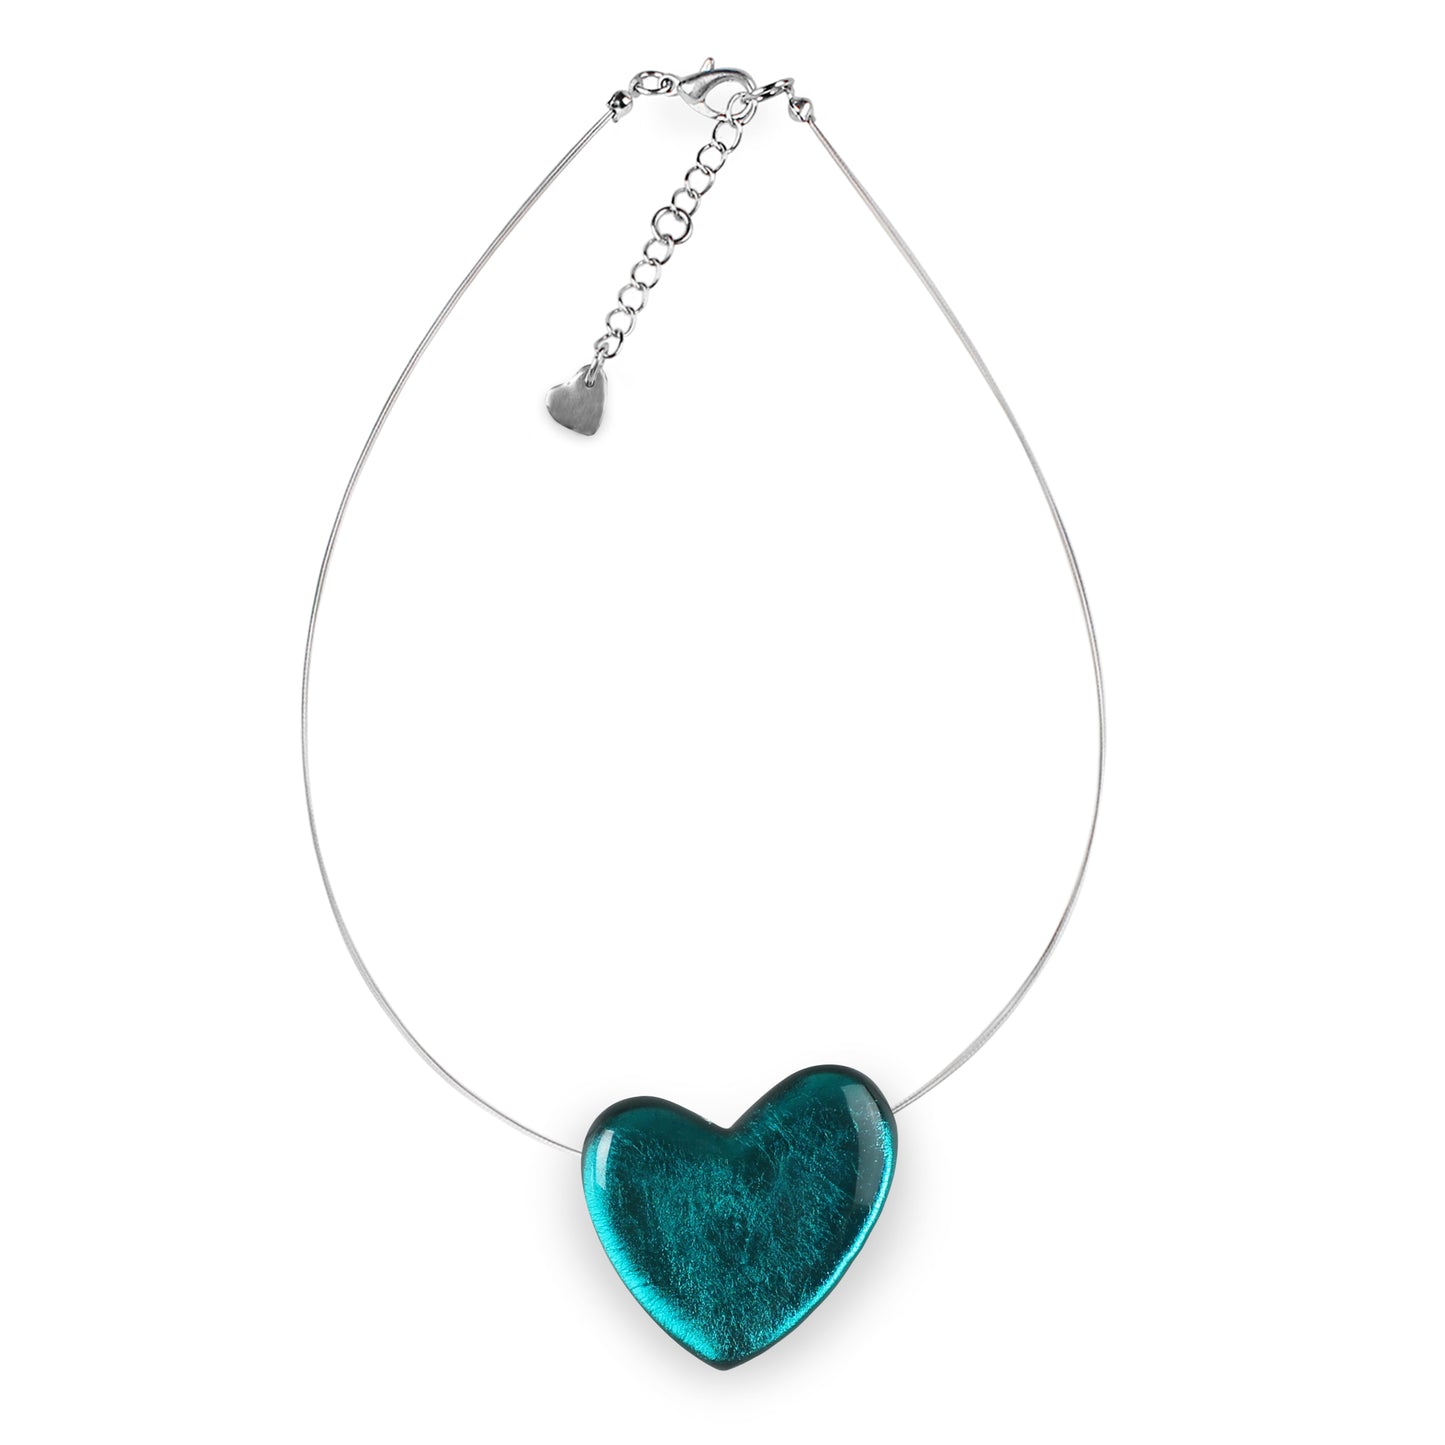 Teal Love Heart Shiny Pendant on Wire